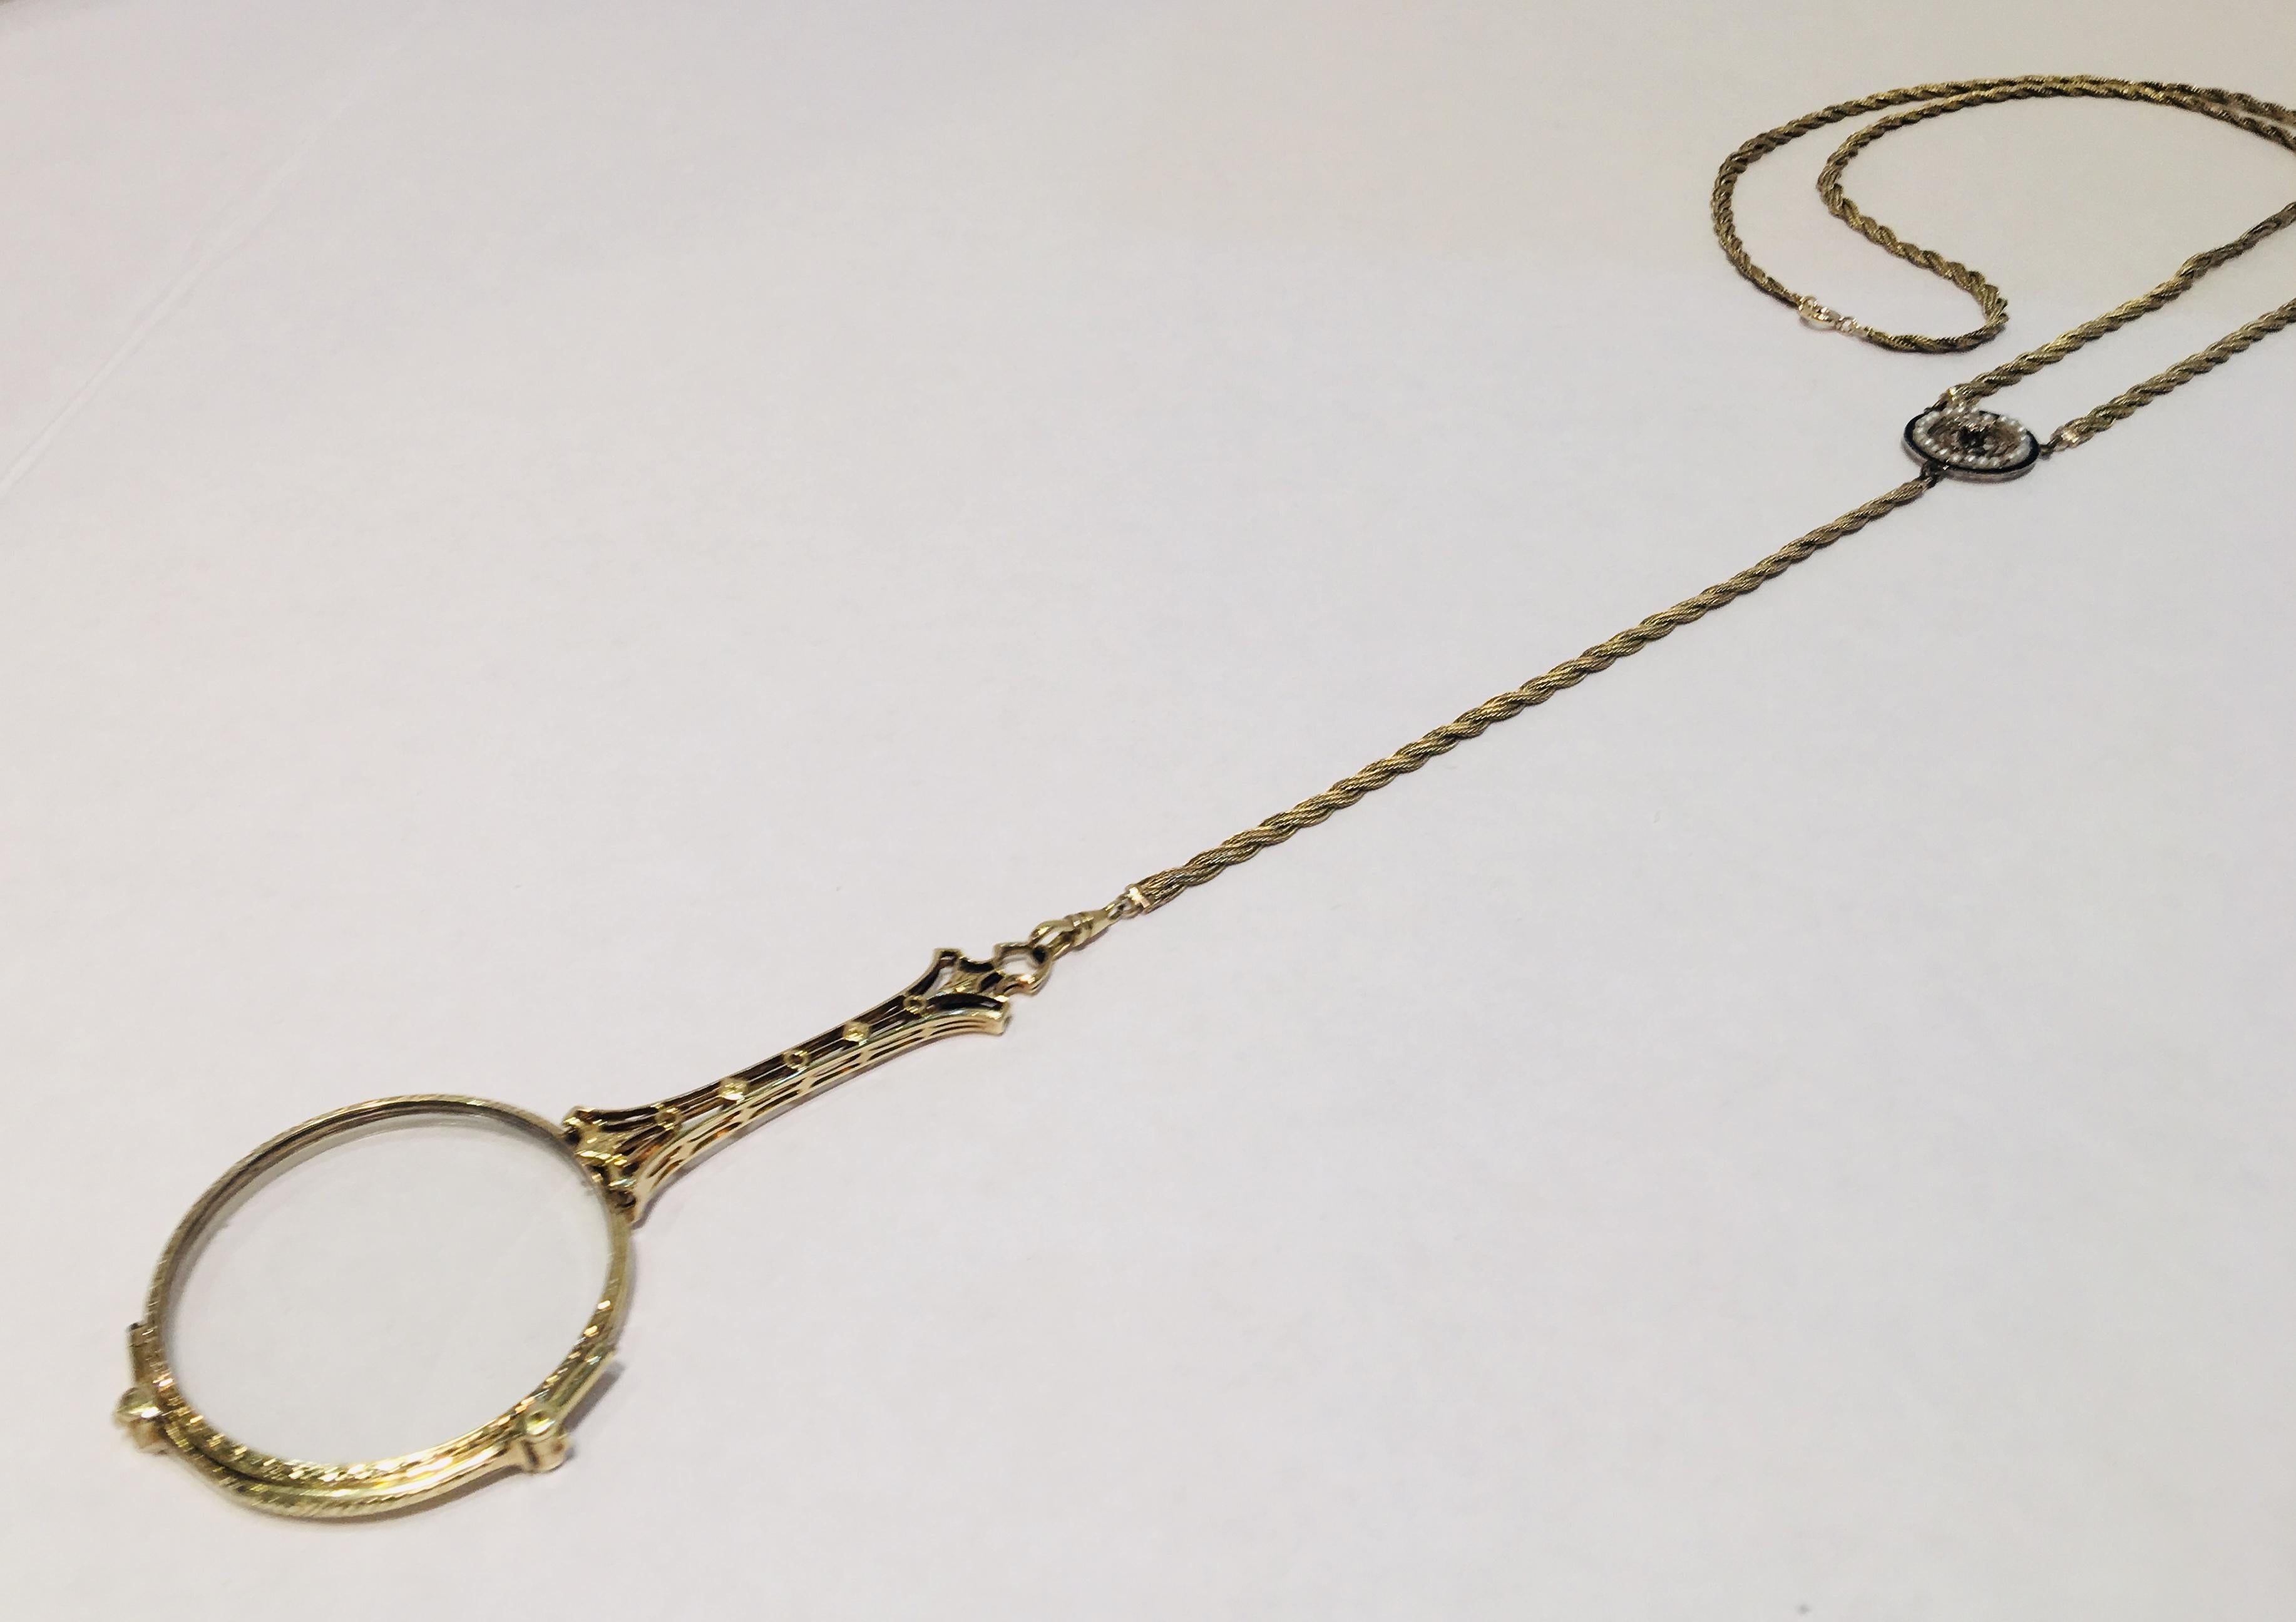 14 Karat Lorgnette Folding Eyeglasses with Gold, Diamond and Seed Pearls Lariat For Sale 3